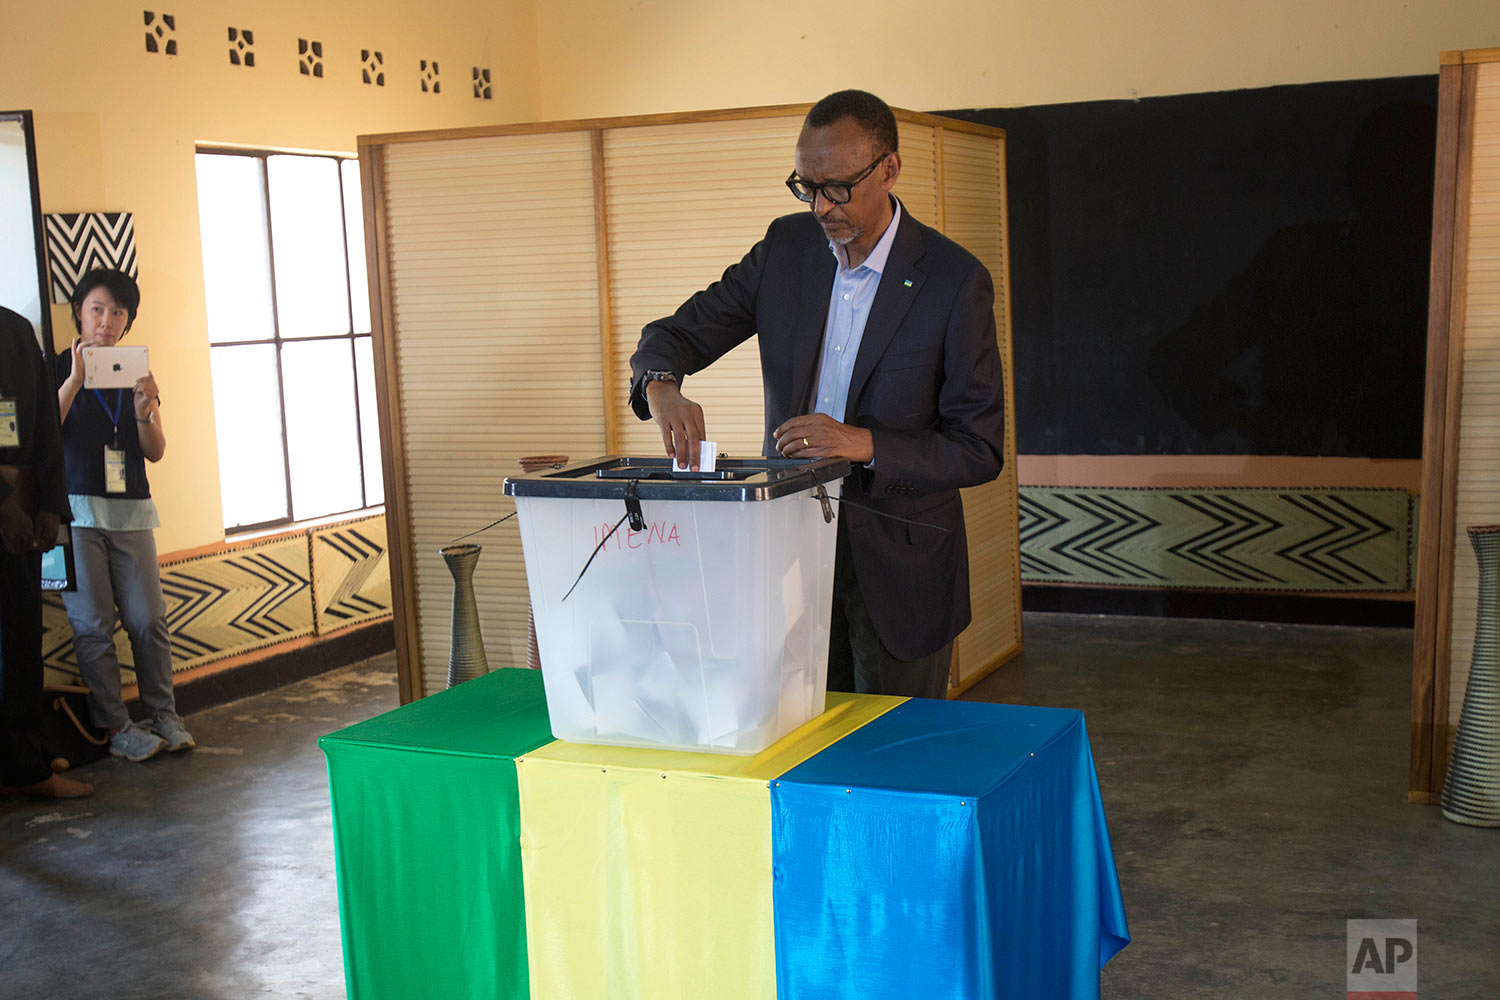  Rwandans President Paul Kagame casts his ballot in Rwanda's capital Kigali Friday Aug. 4, 2017 for the presidential elections in which he is widely expected to win another term after the government disqualified all but three candidates. (AP Photo/Je